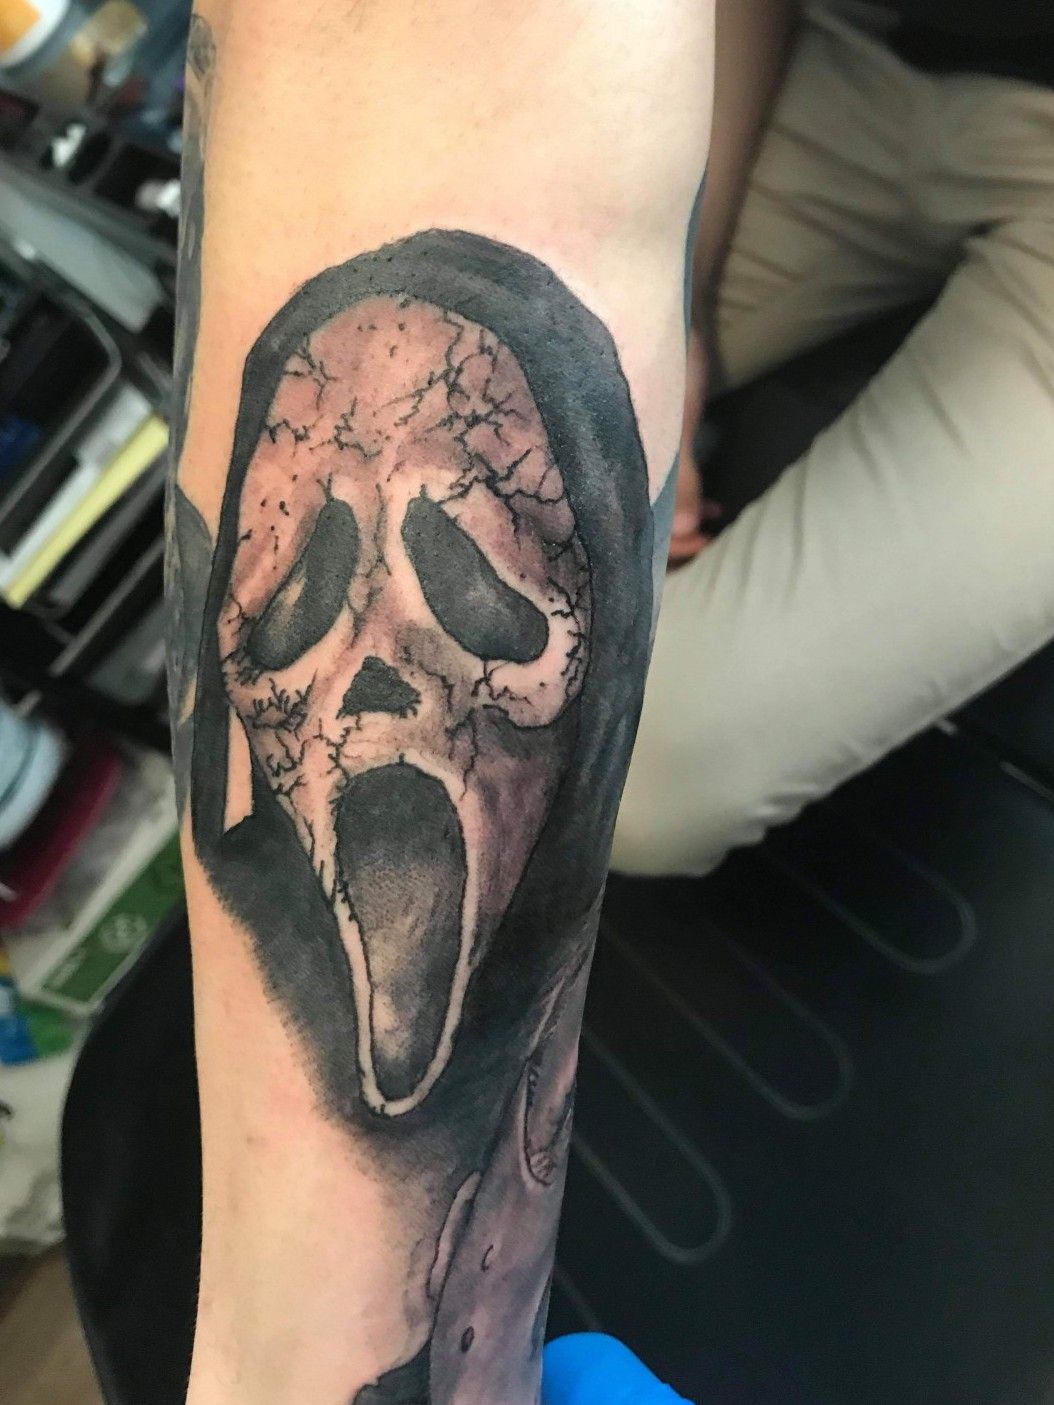 Barber DTS on Twitter Can you believe theres a new Scream coming   LOVE this ghostface by samnancytattoos  ghostface scream  screamtattoo ghostfacetattoo mask masktattoo halloween spookyszn  spookytattoo halloweentattoo barberdts 